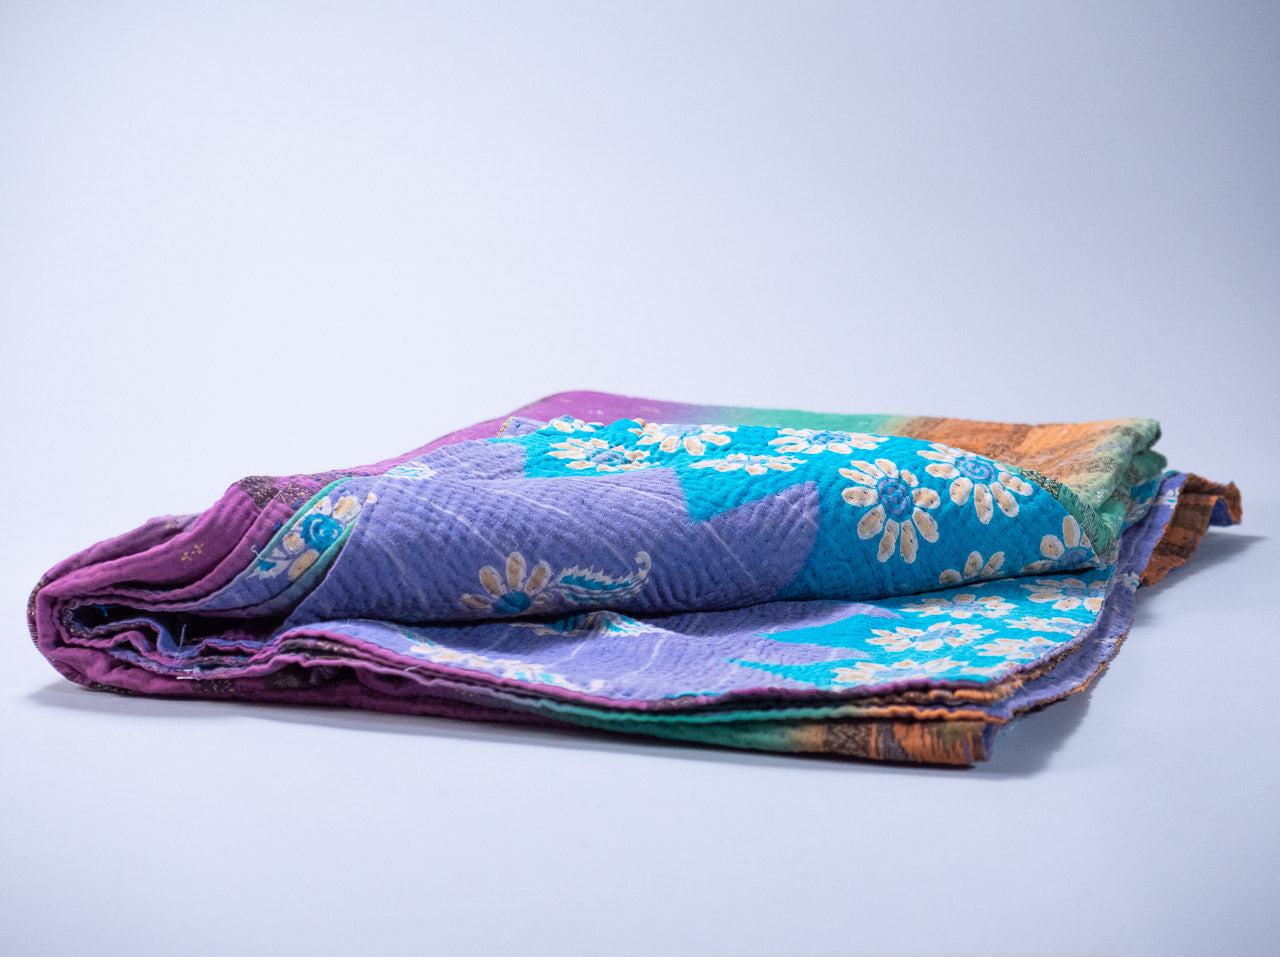 Couvre lit Kantha. Bed spread made with recycled vintage saris. Handmade.